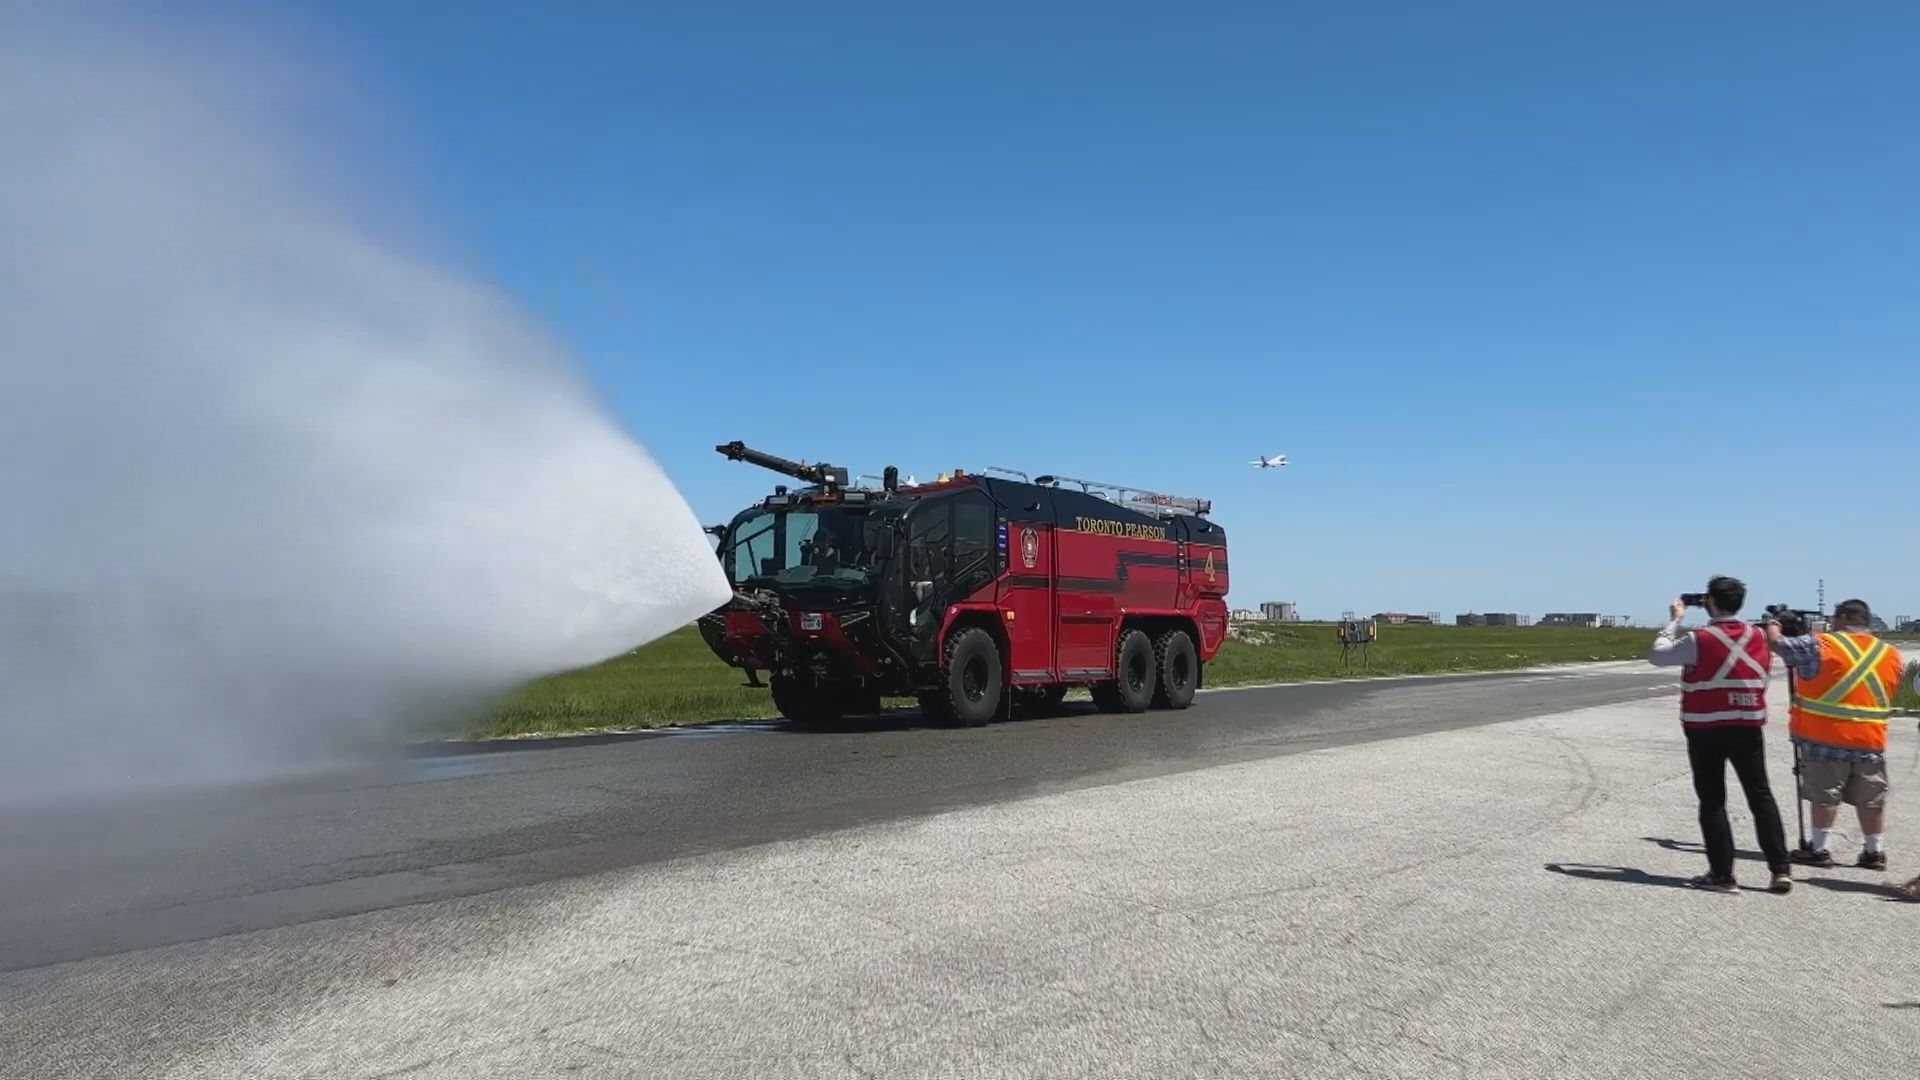 Get to know Toronto Pearson's new cutting edge firefighting vehicles